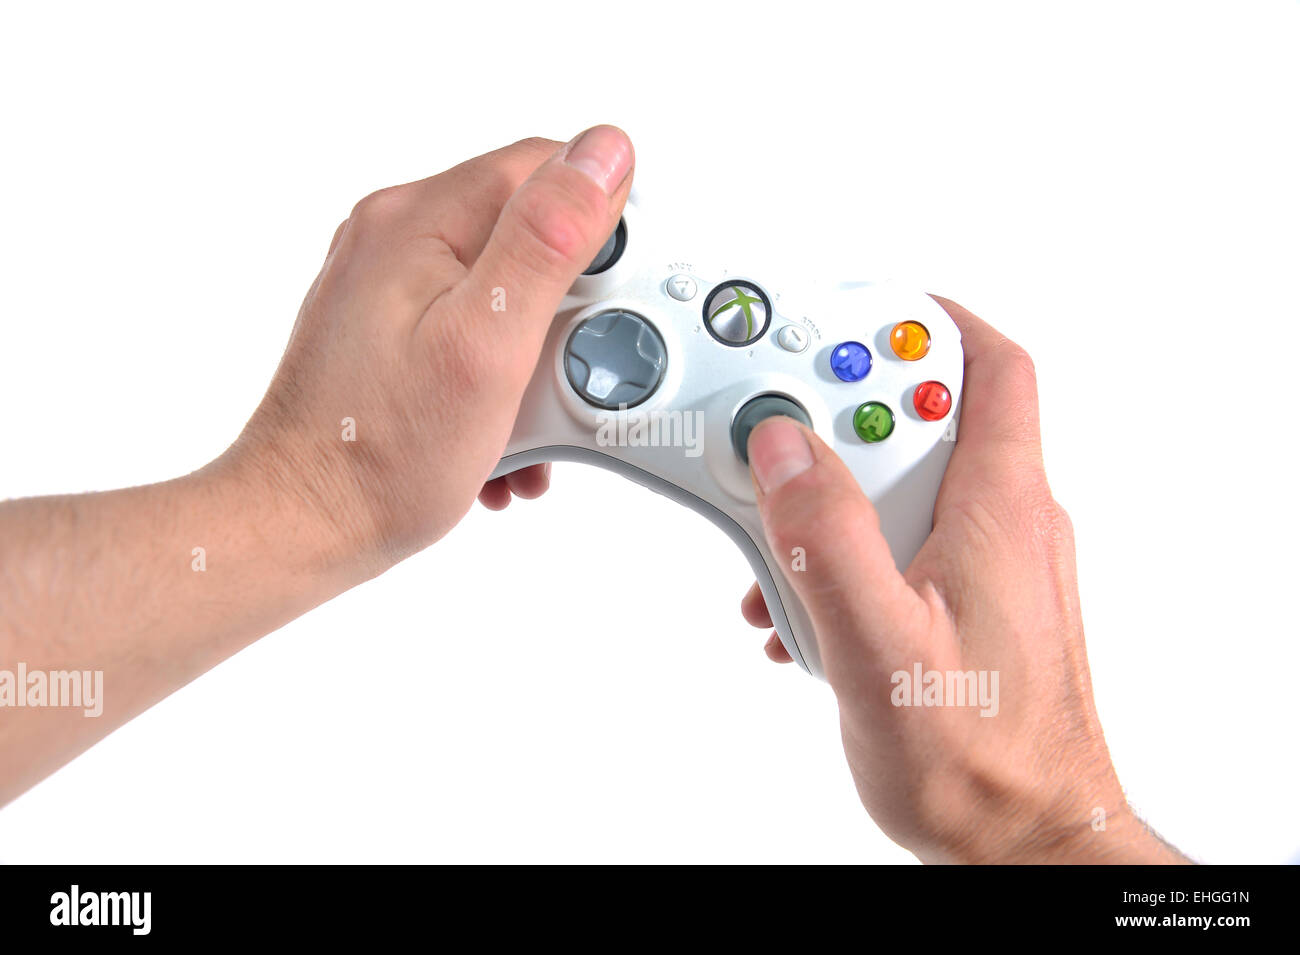 first person view of a person playing with an xbox 360 Microsoft controller Stock Photo